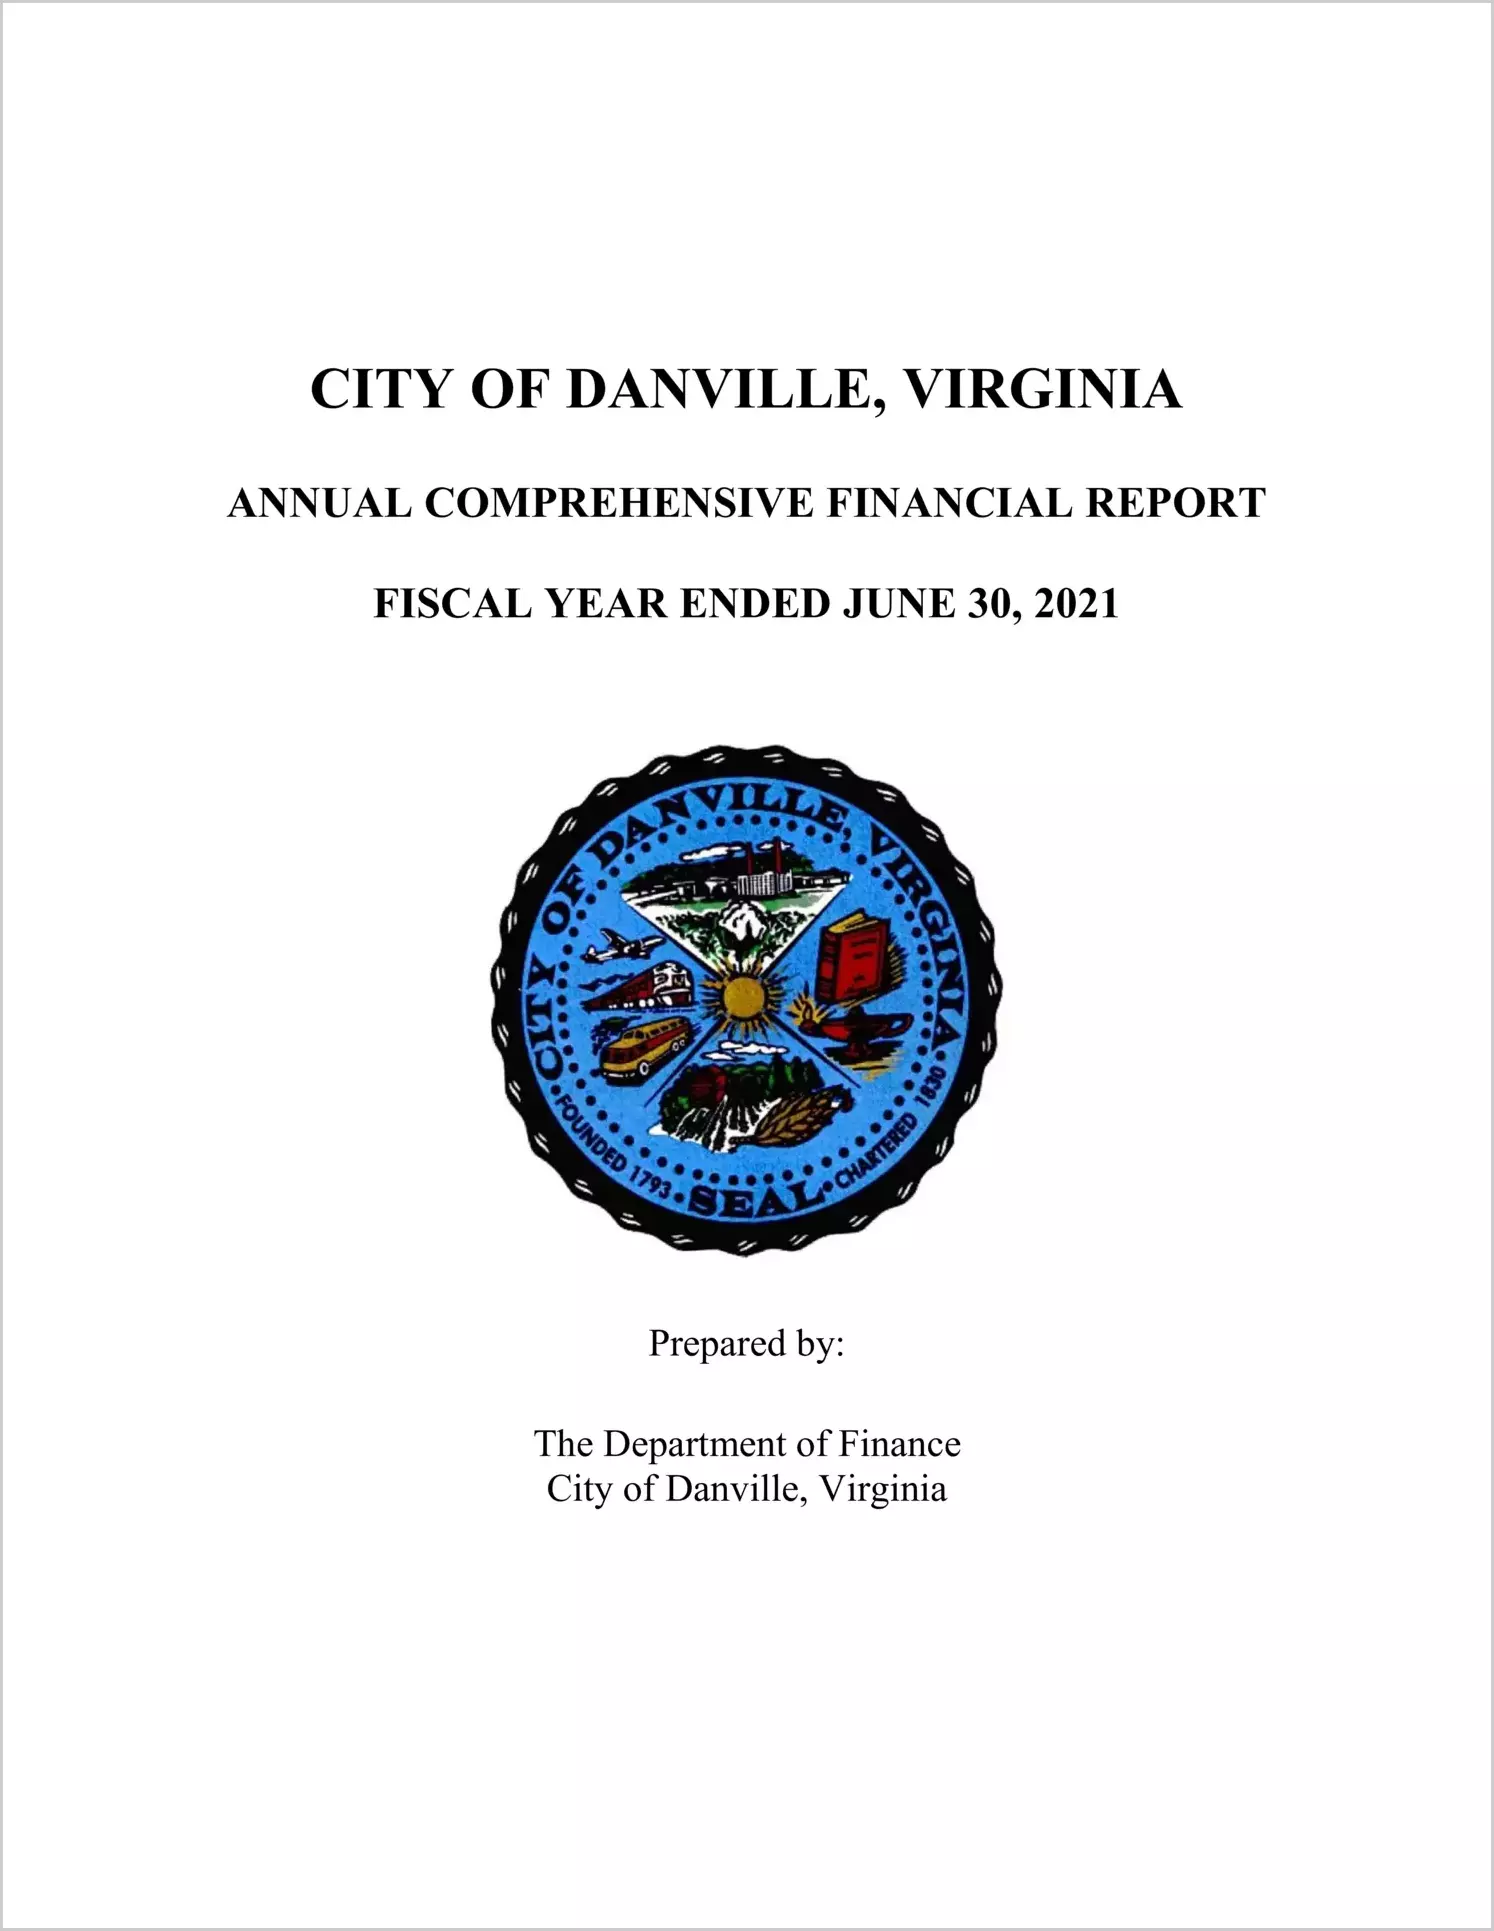 2021 Annual Financial Report for City of Danville